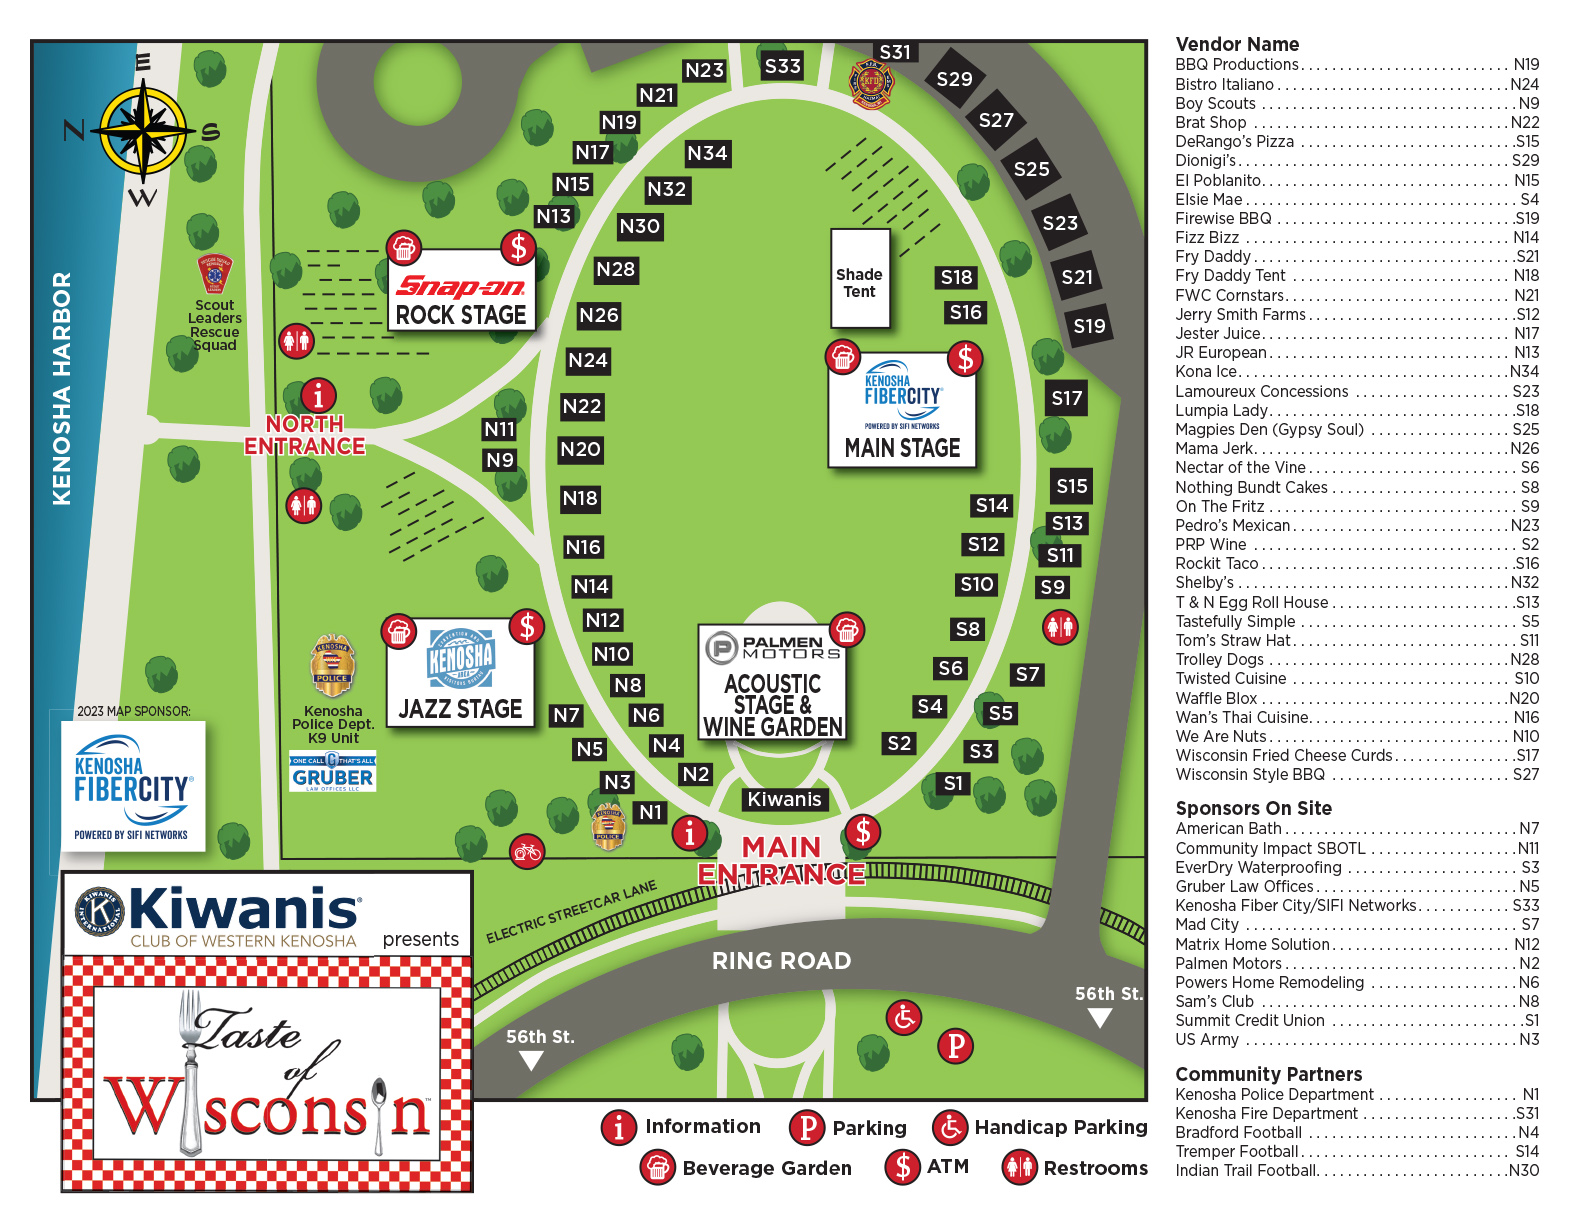 Taste of Wisconsin™ Event Map 2023